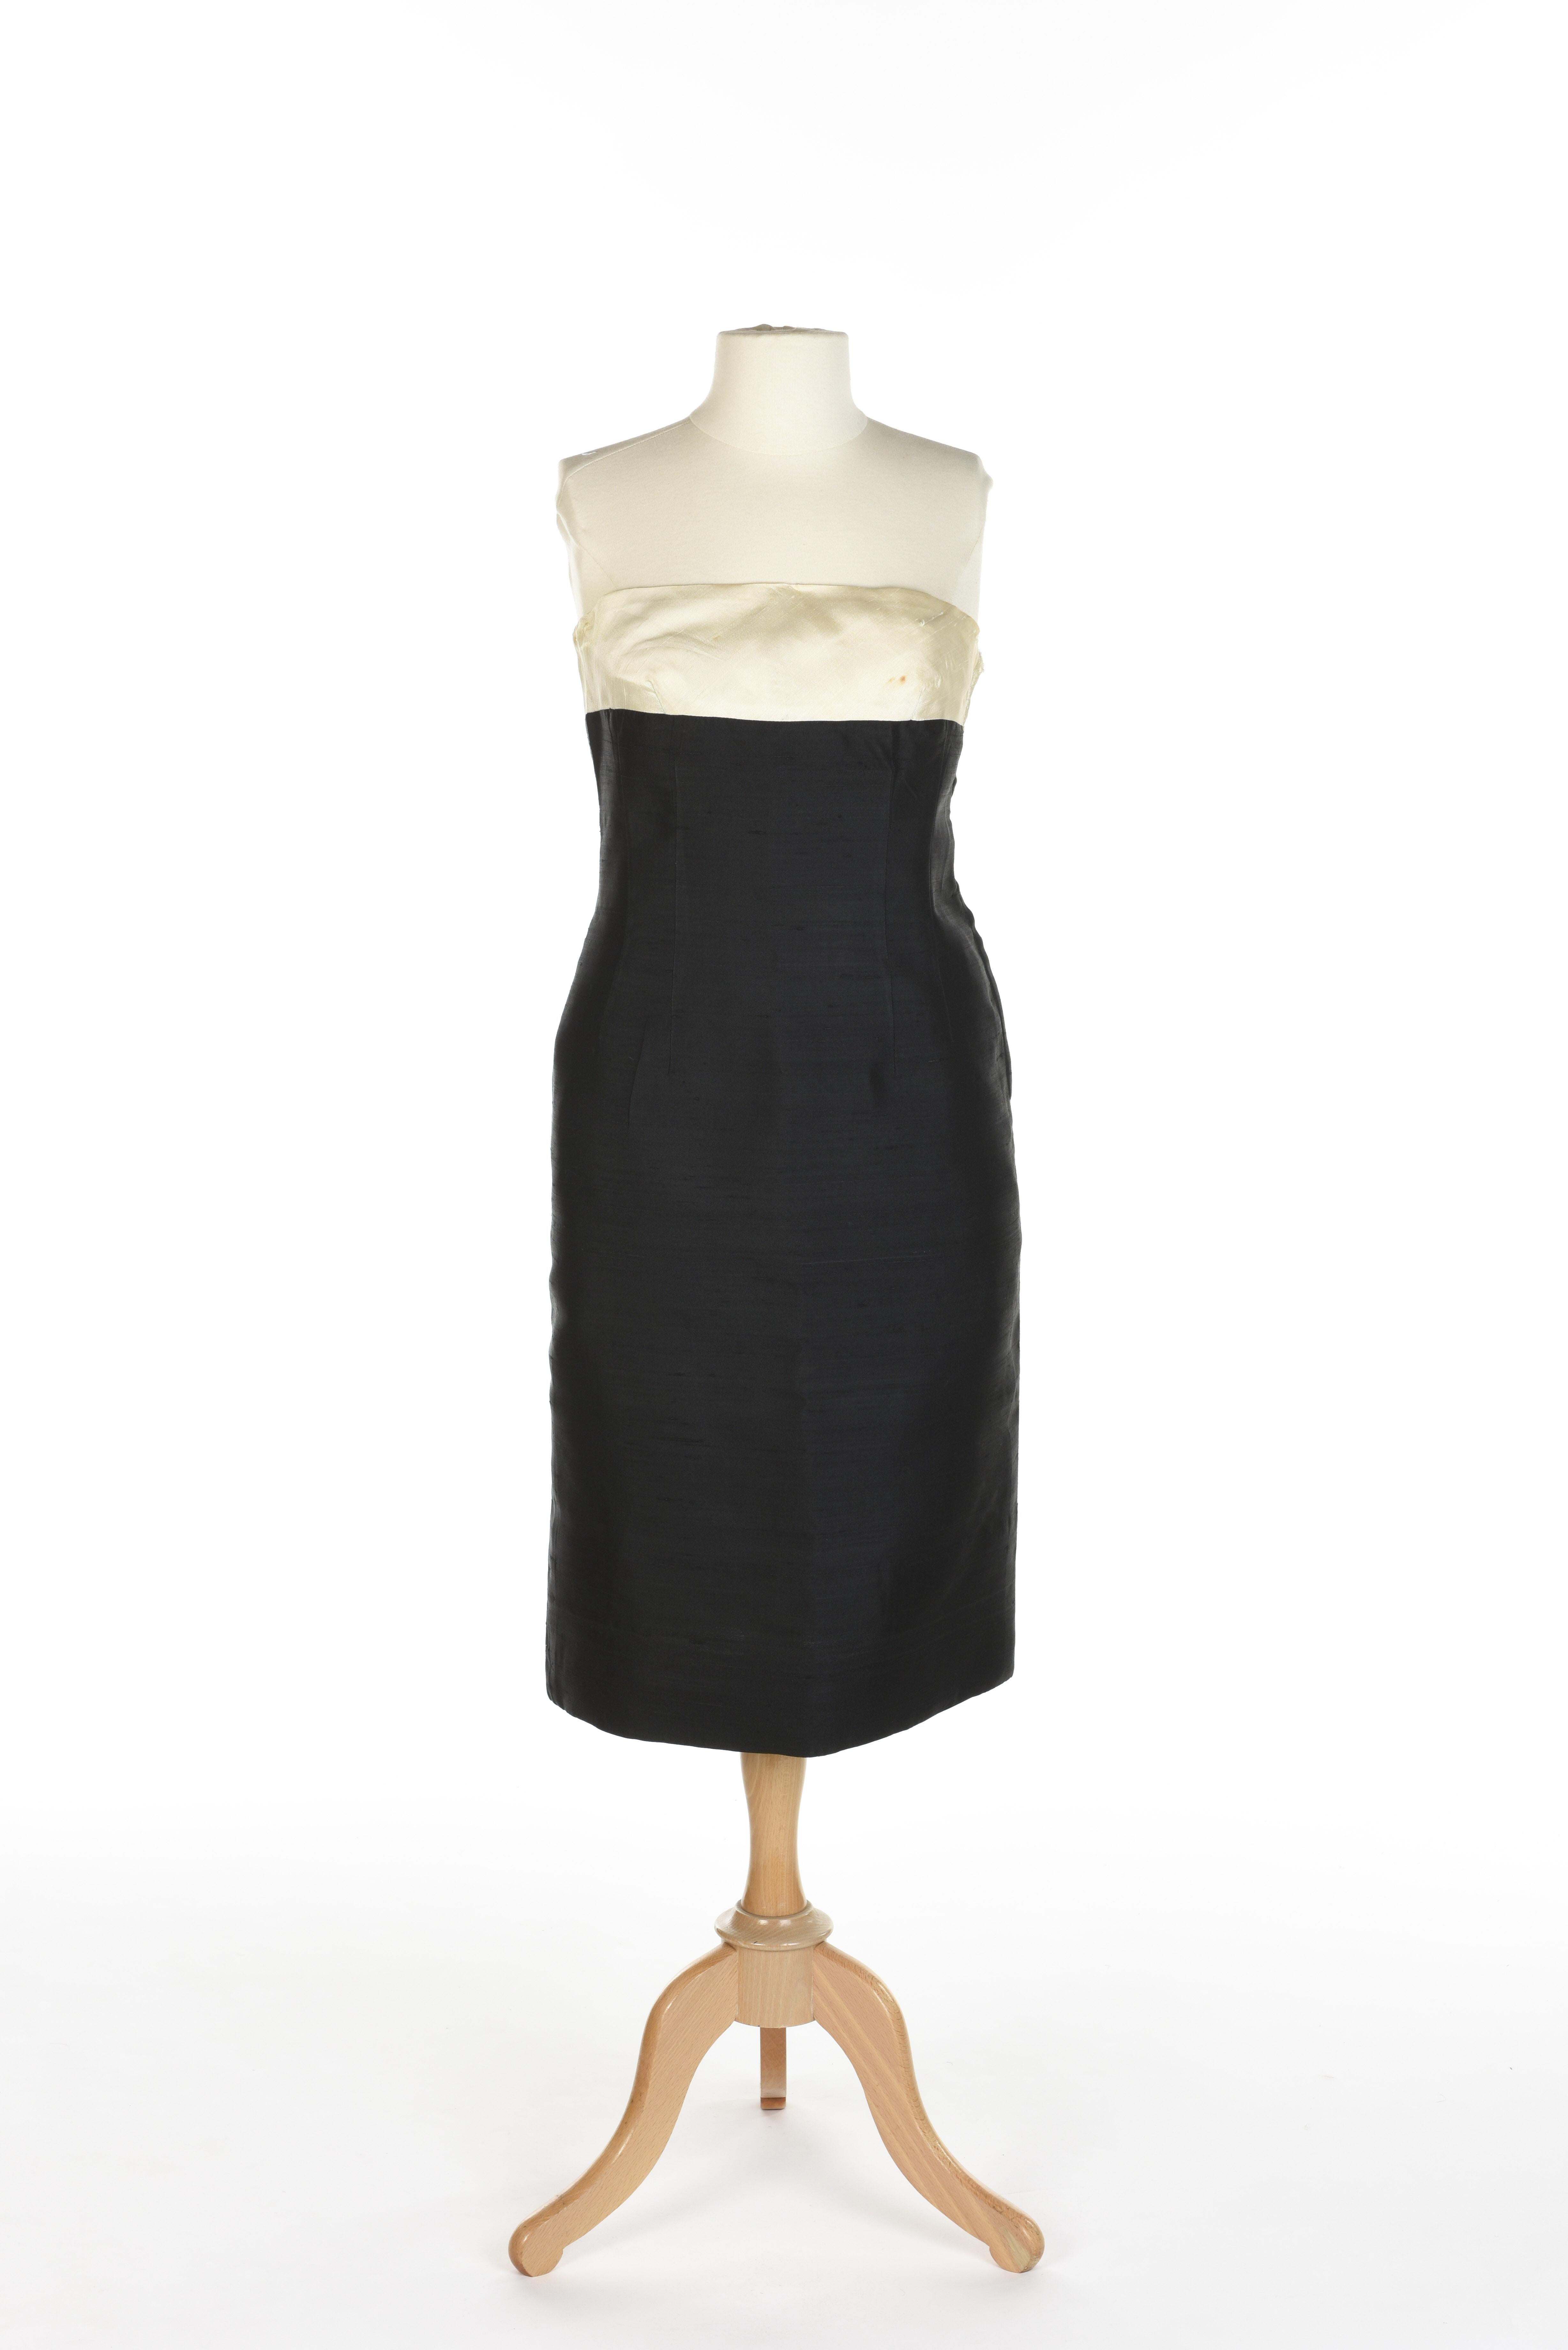 An Hubert de Givenchy French Couture Cream and Black silk Evening Set Circa 1965 For Sale 9